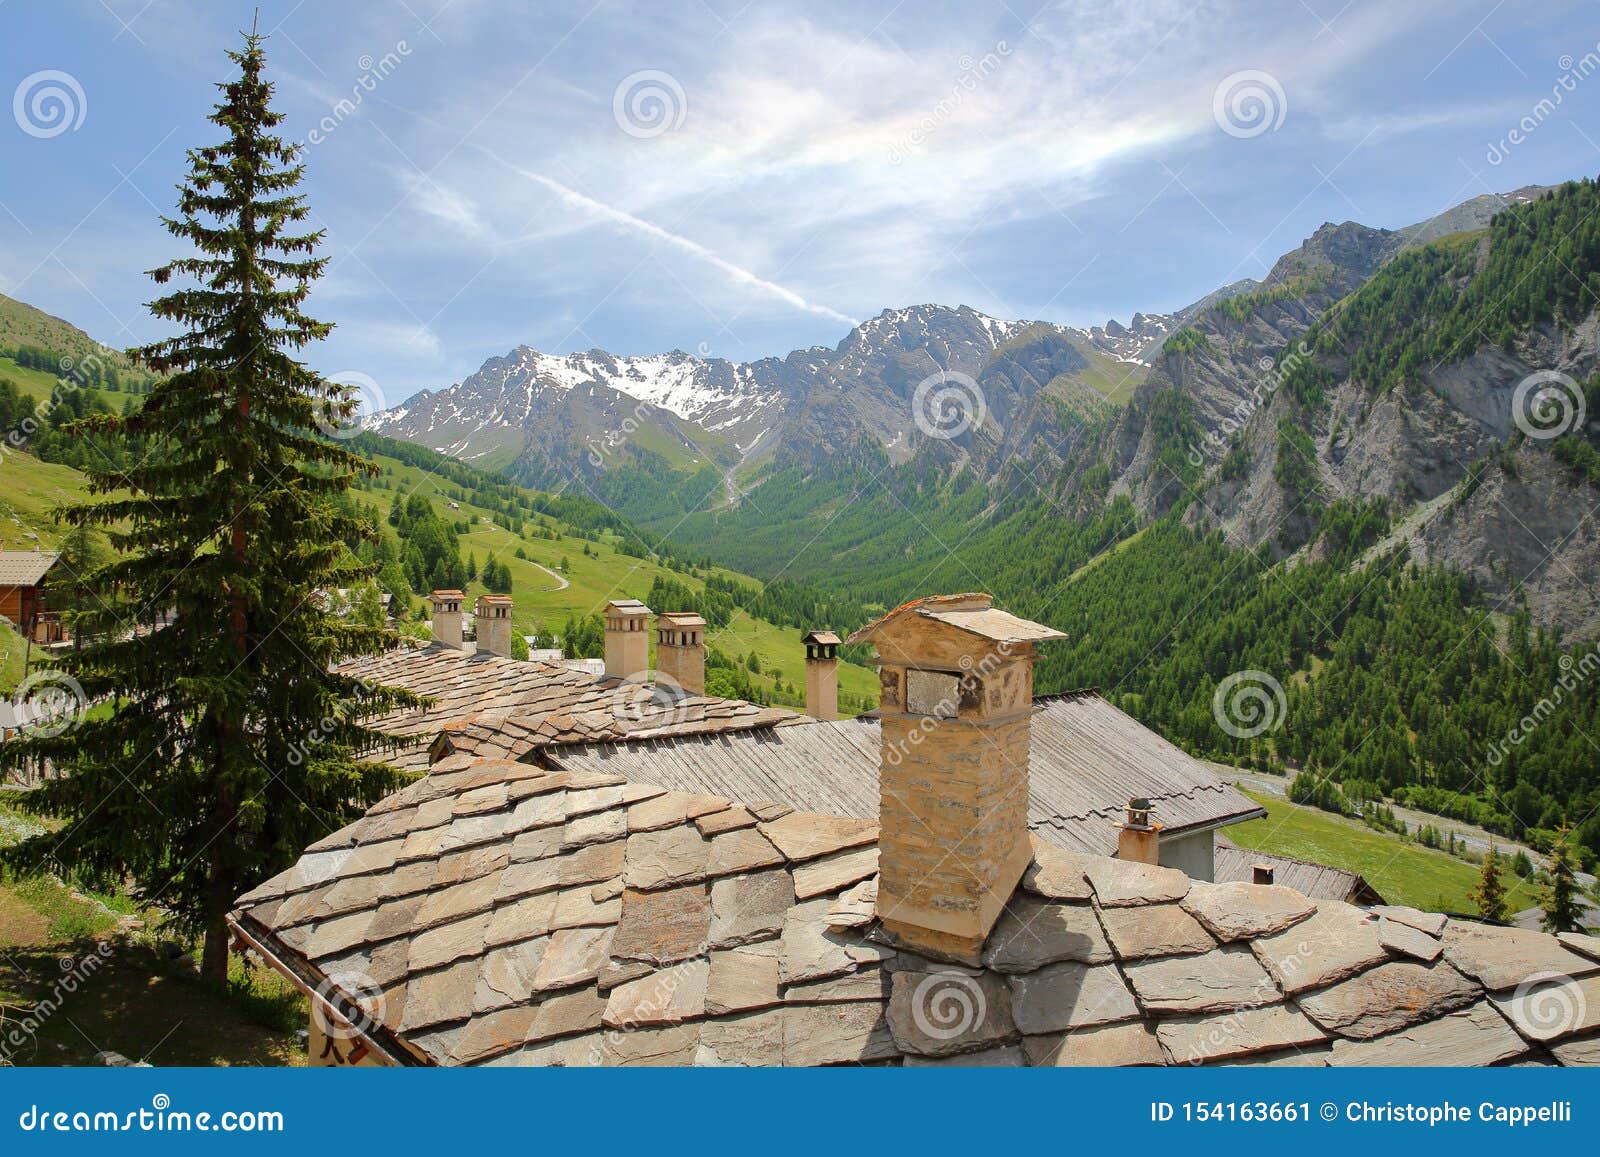 traditional houses roofs and chimneys, with a mountain range in the background, saint veran